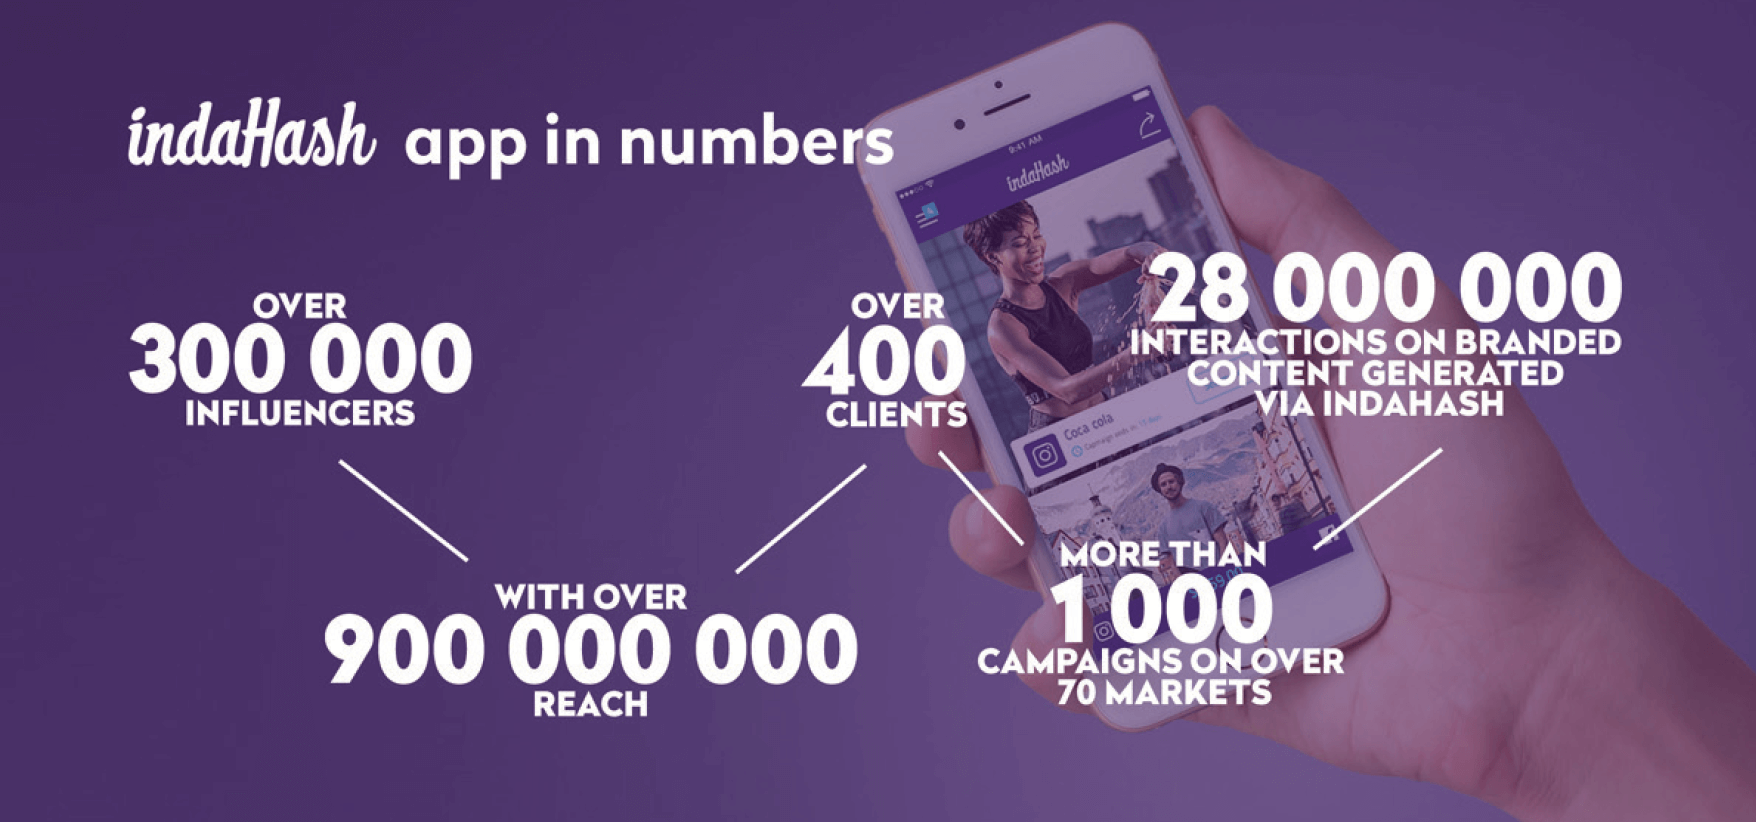 Indahash App In Numbers